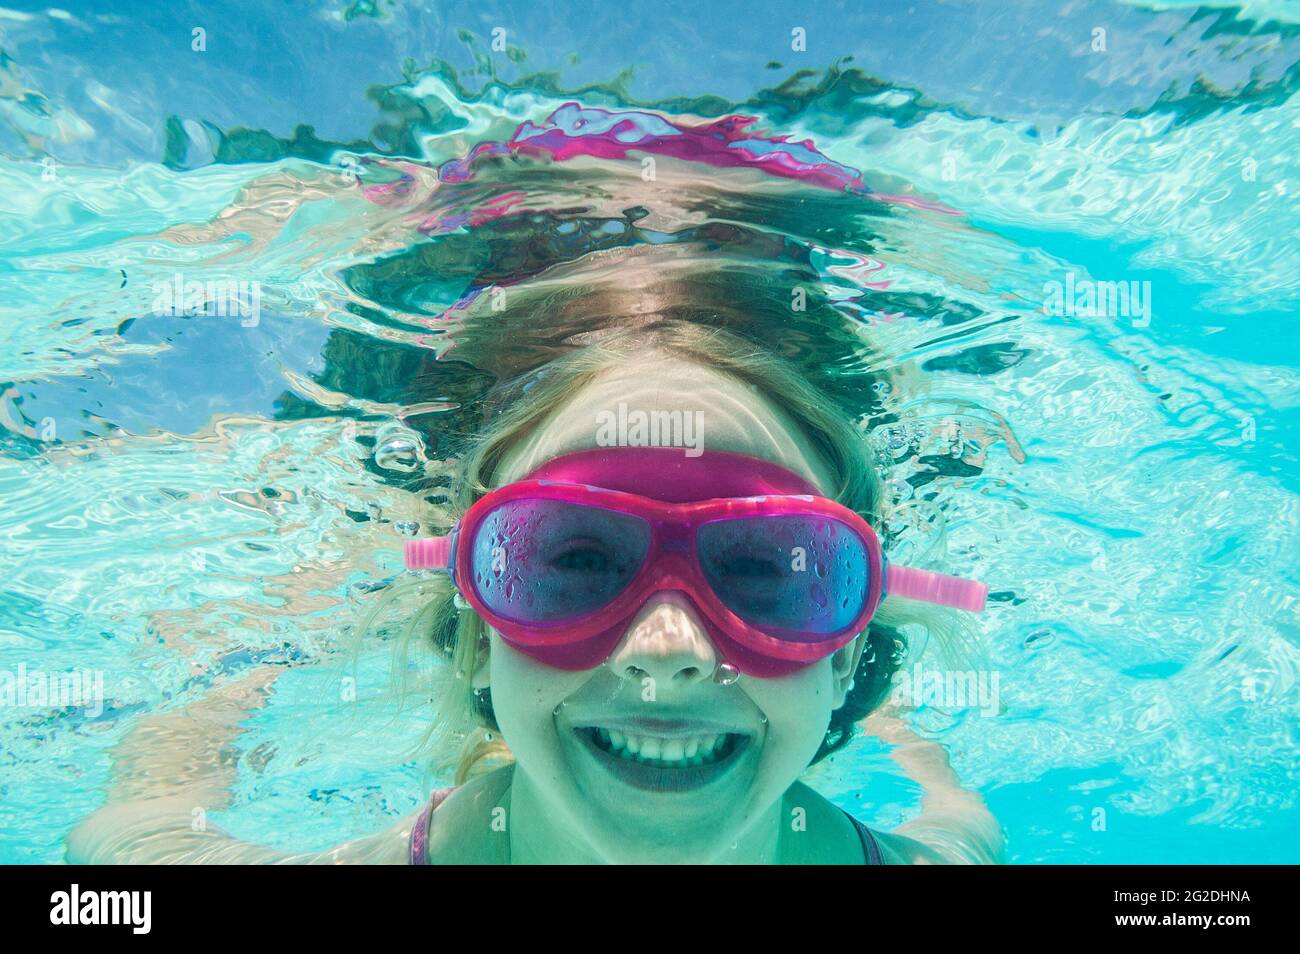 A person underwater enjoying them selves in a swimming pool. Stock Photo